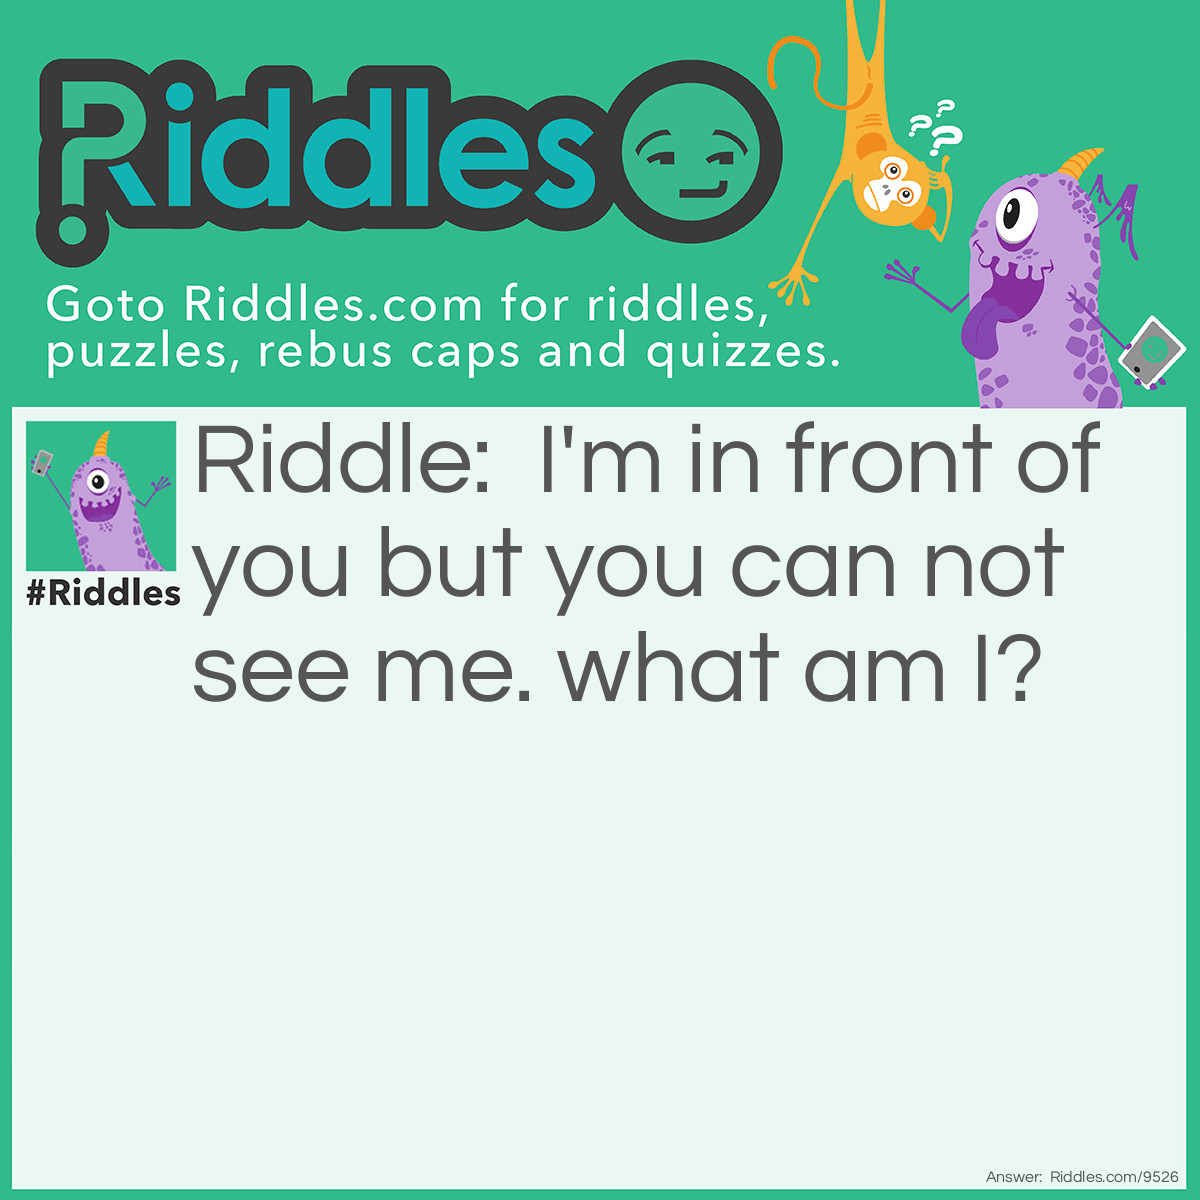 Riddle: I'm in front of you but you can not see me. what am I? Answer: Your Future